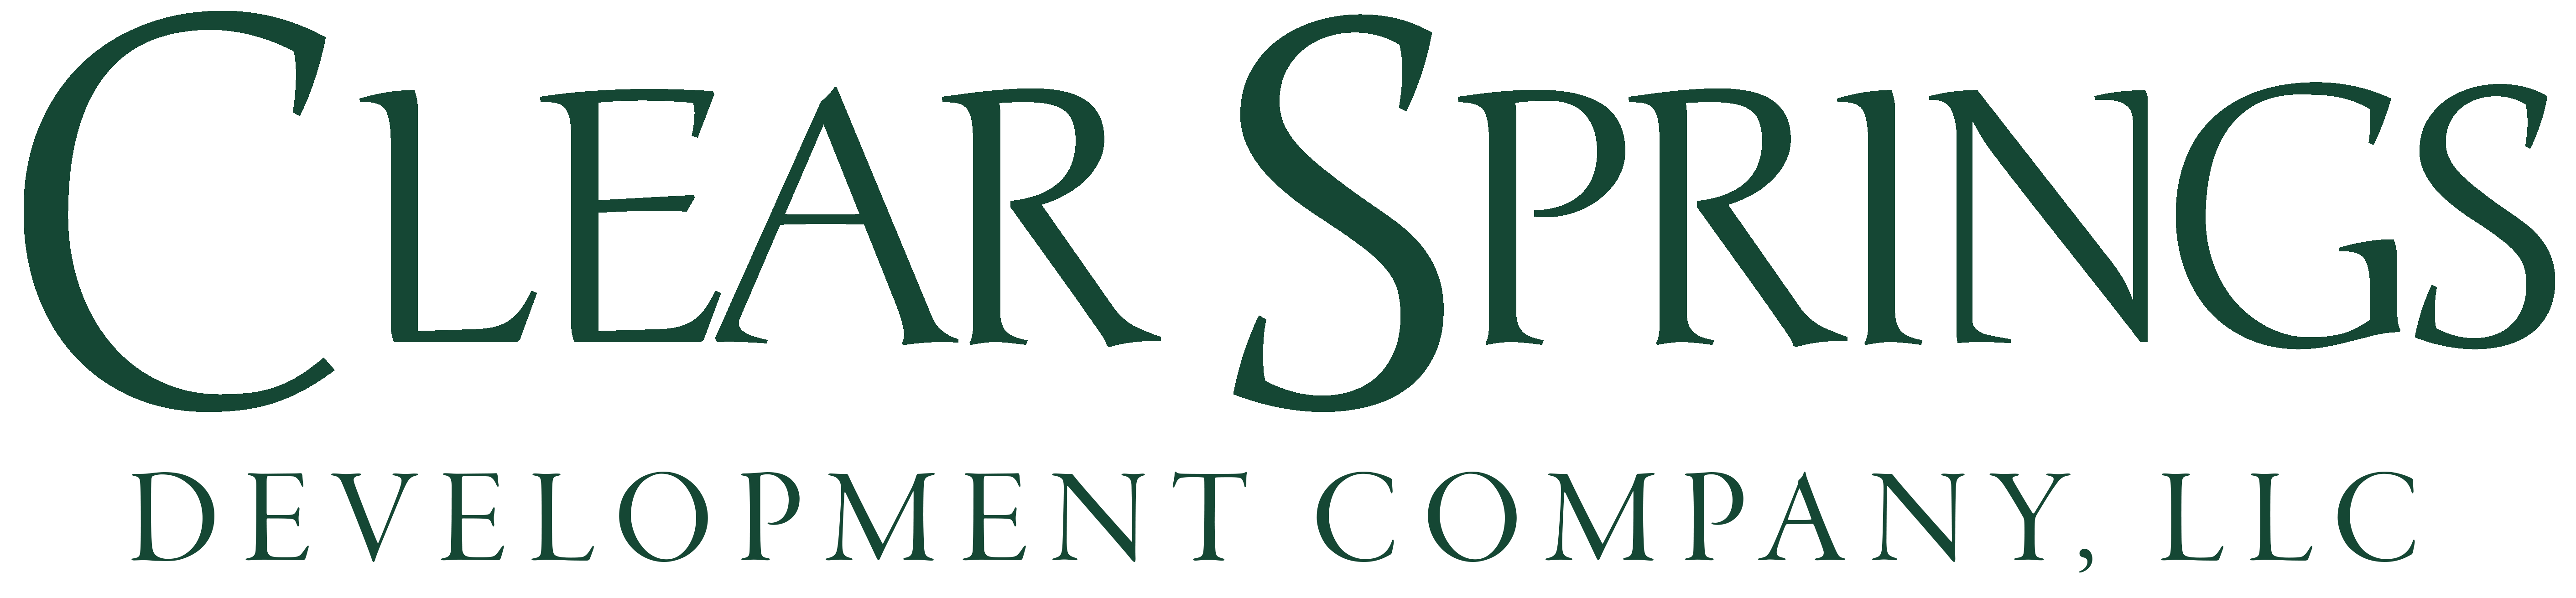 Clear Springs Development Company